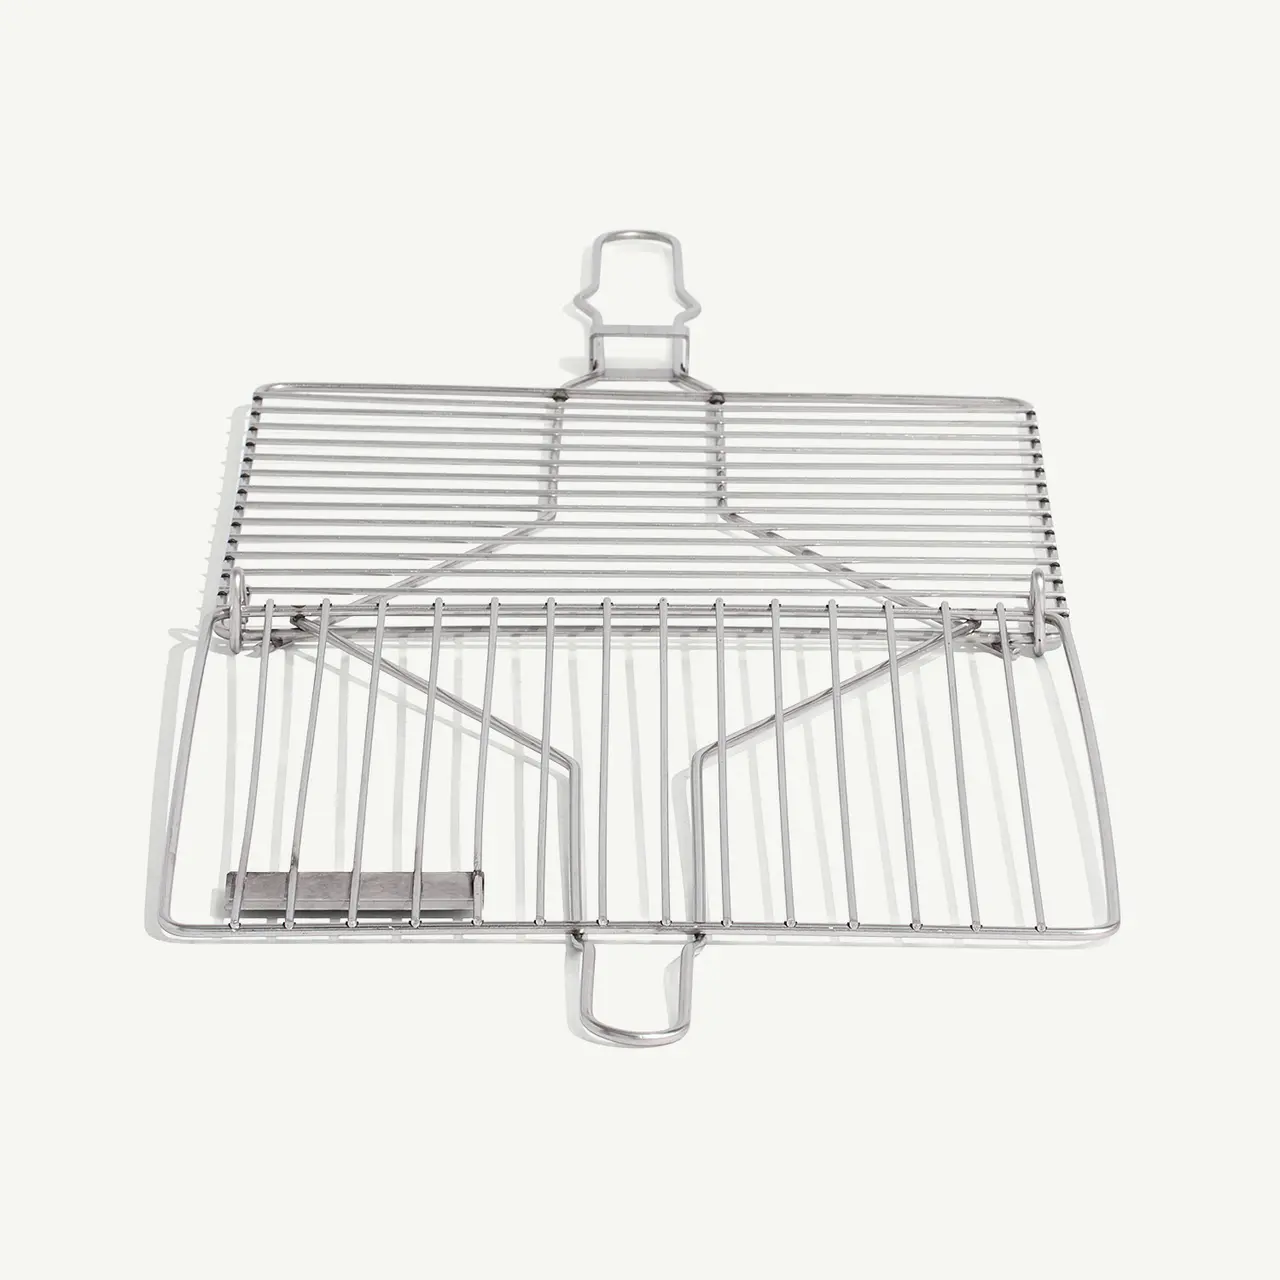 A stainless steel fish grilling basket lies against a white background.